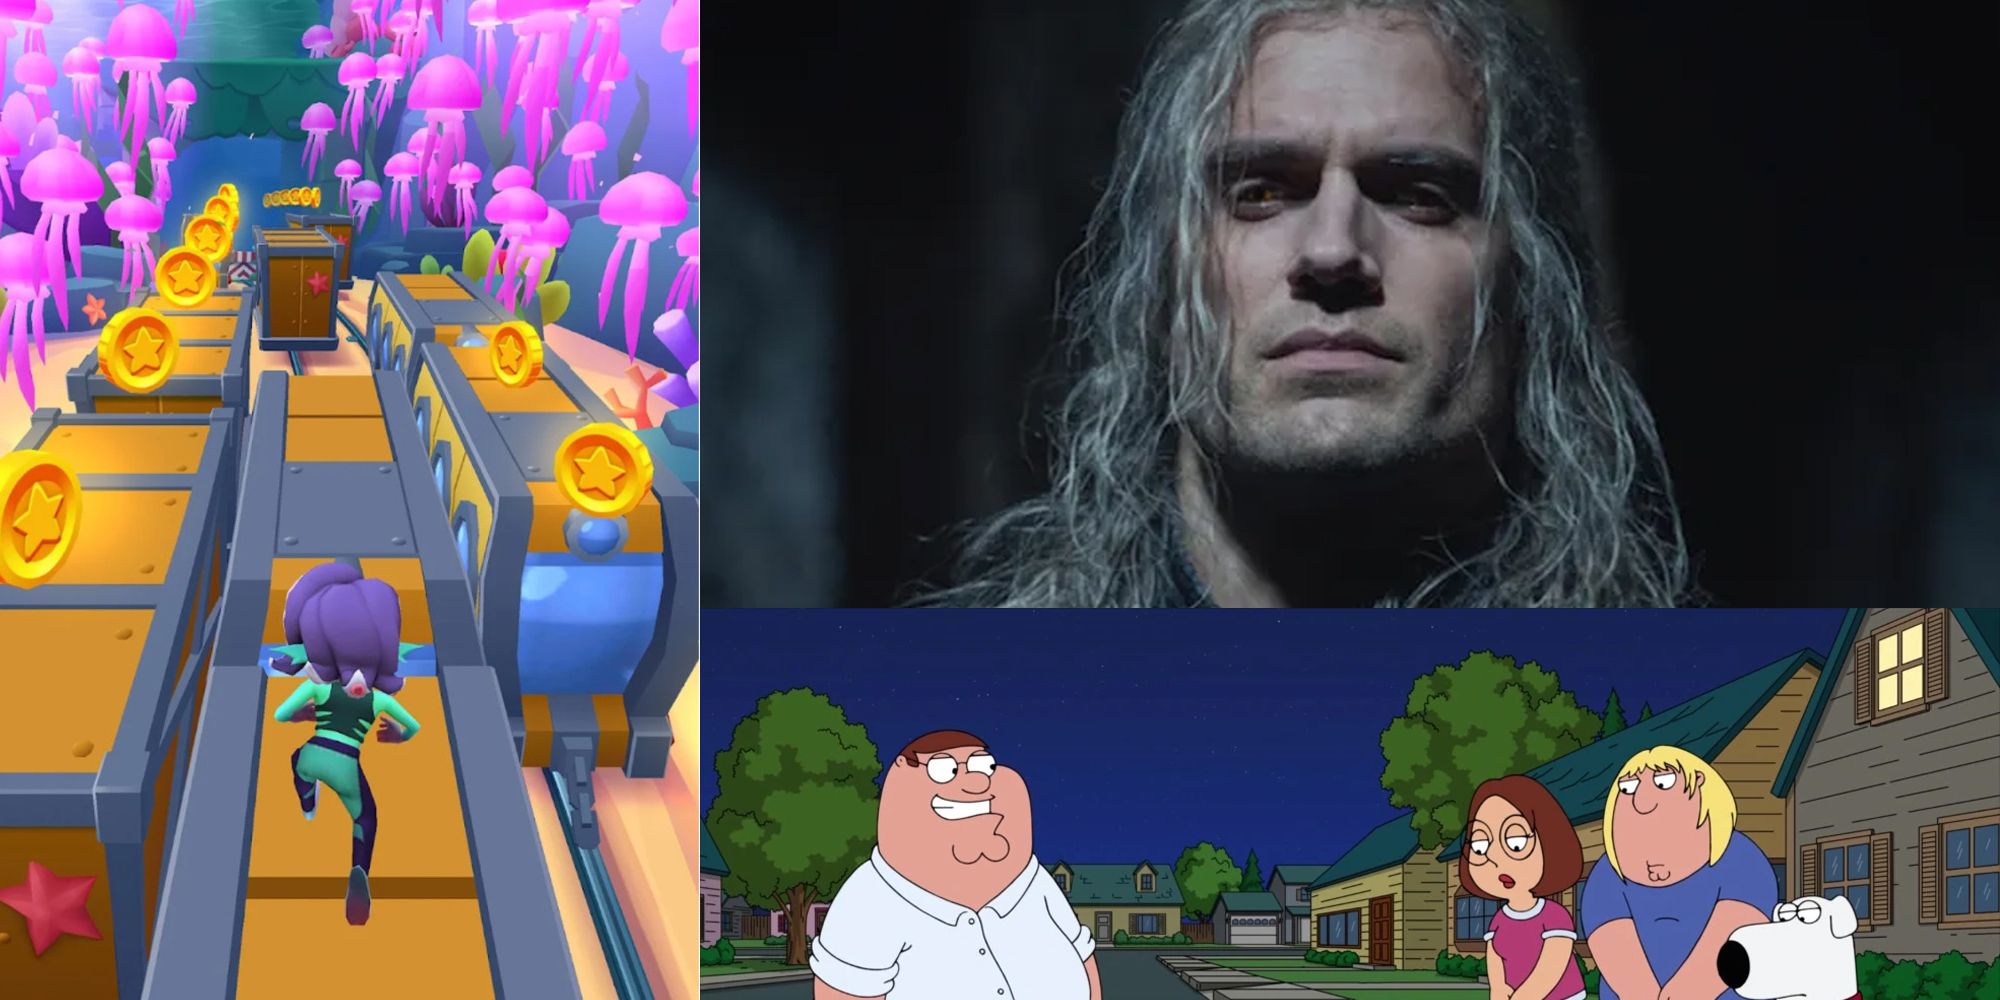 The Witcher TikTok-style with Subway Surfers on the left and a Family Guy clip on the bottom